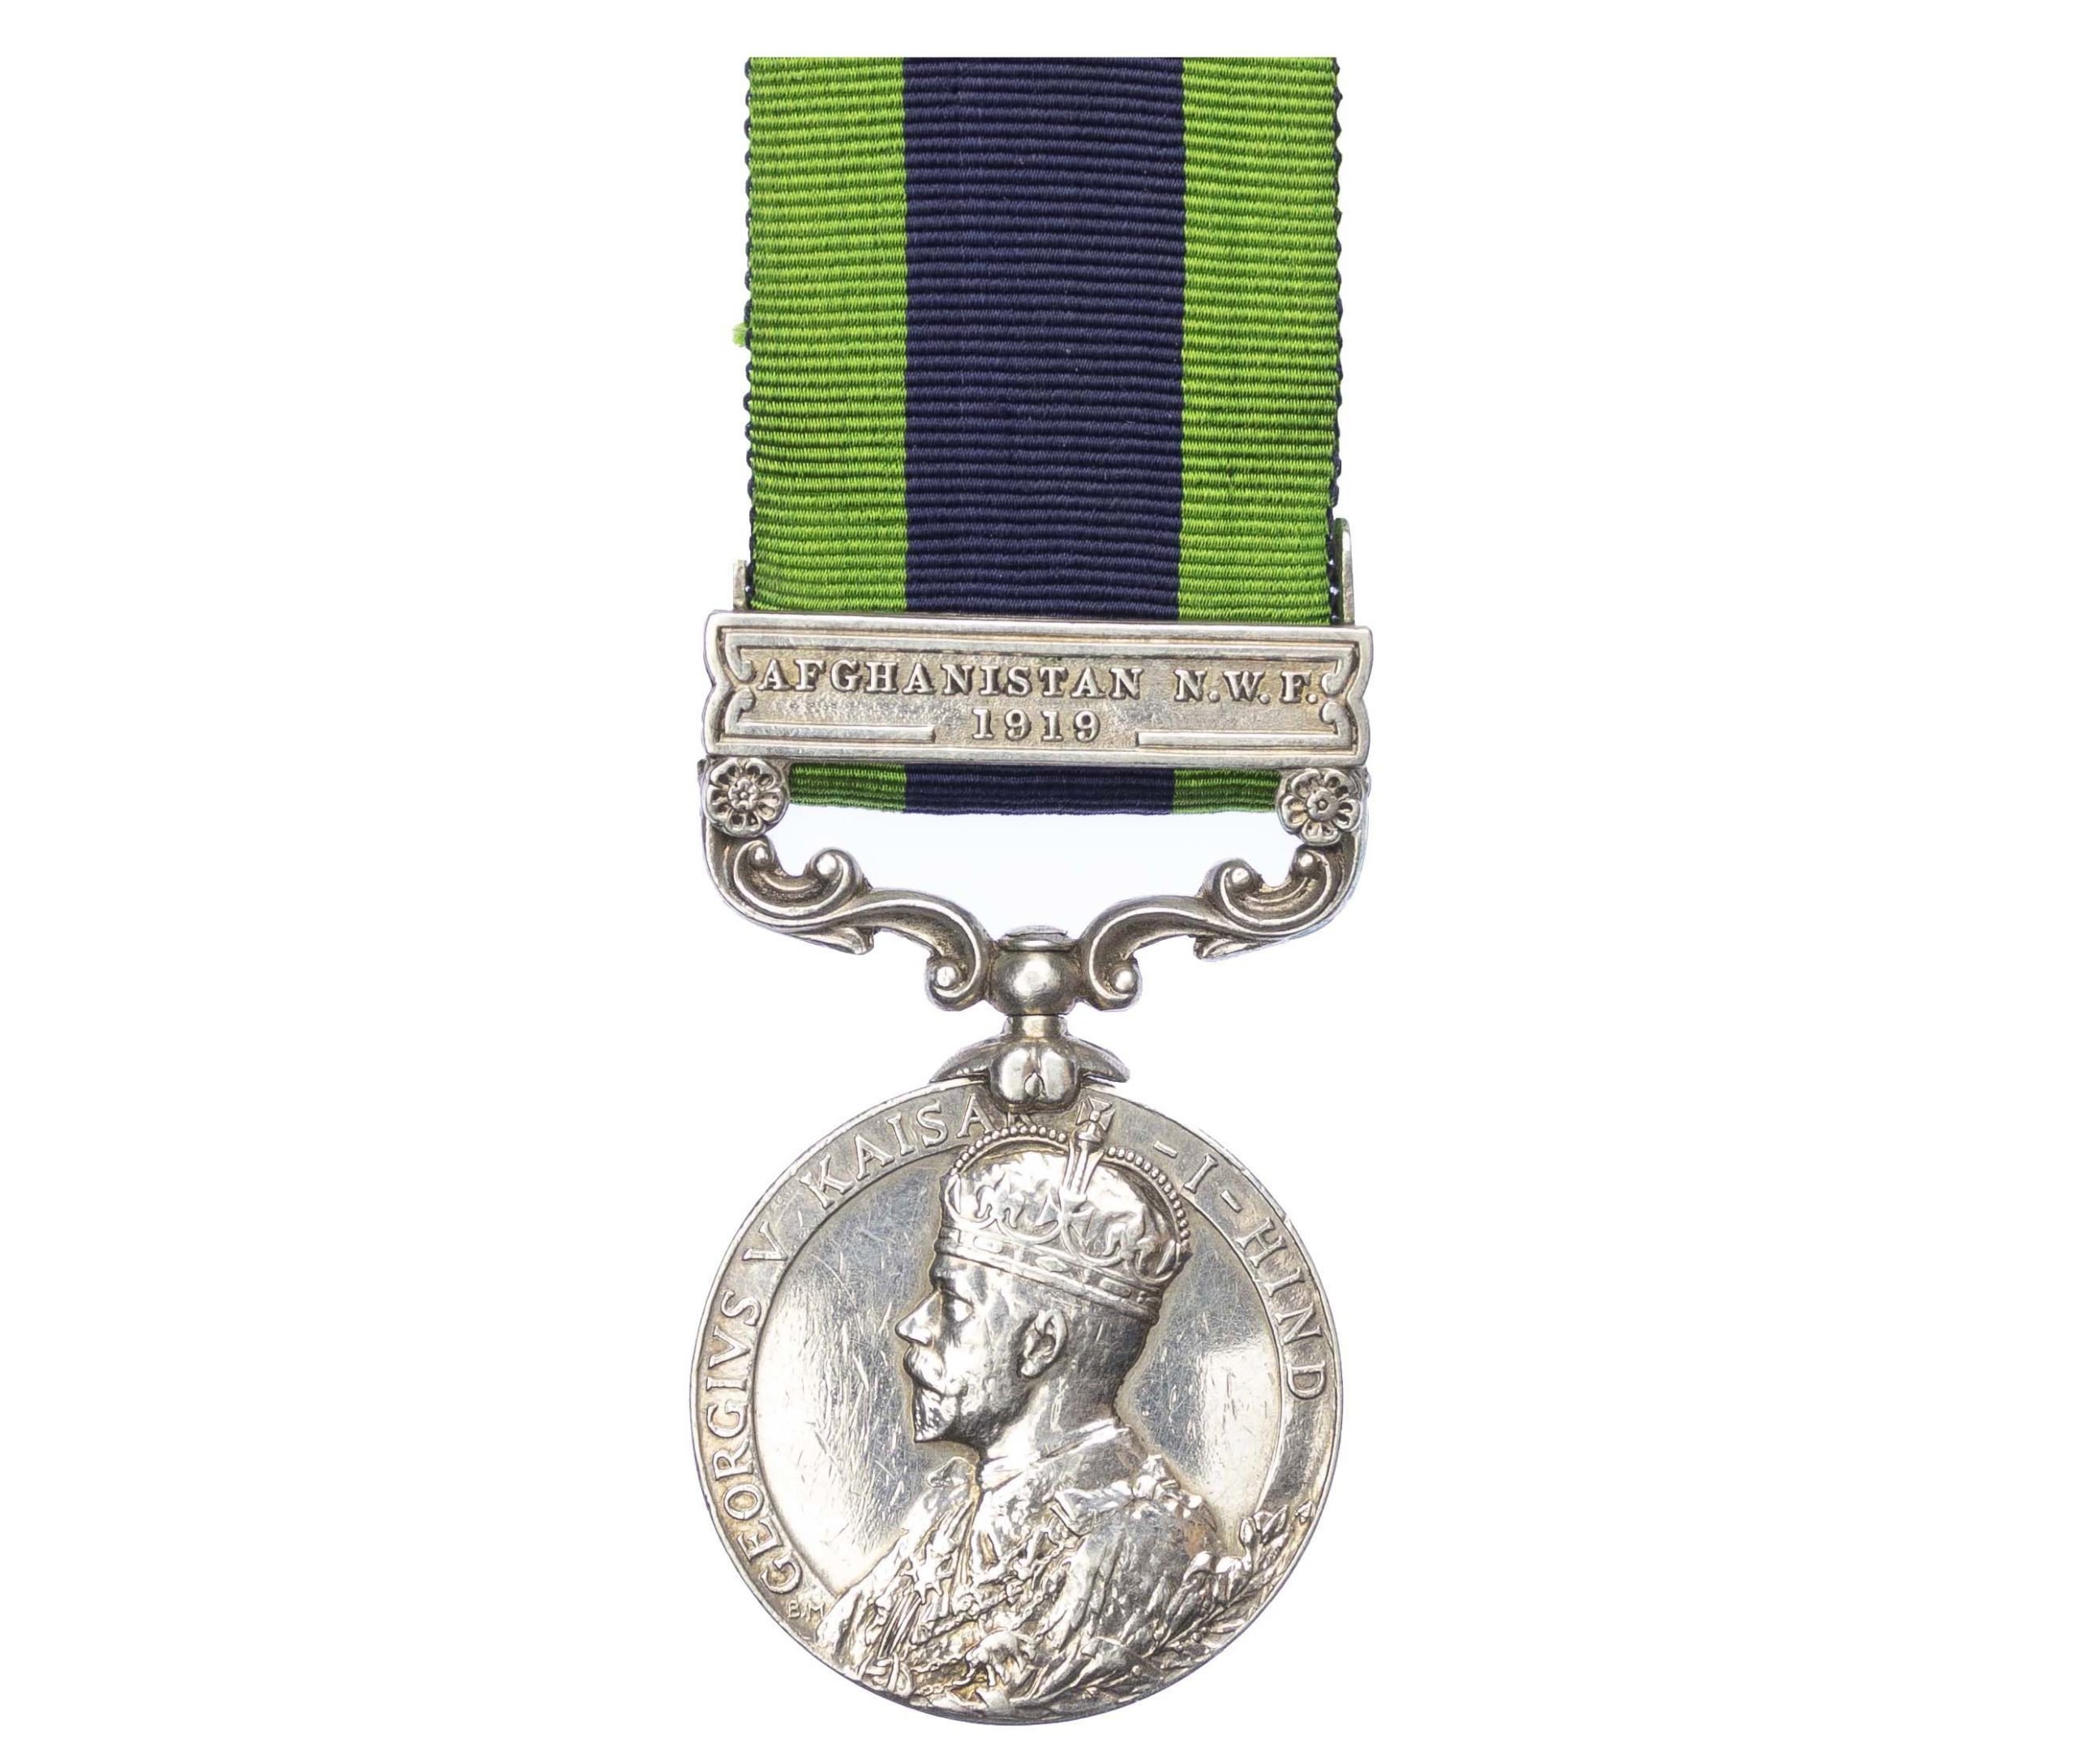 India General Service Medal, 1908-35, one clasp, Afghanistan N.W.F. 1919 to Private P. Kirk